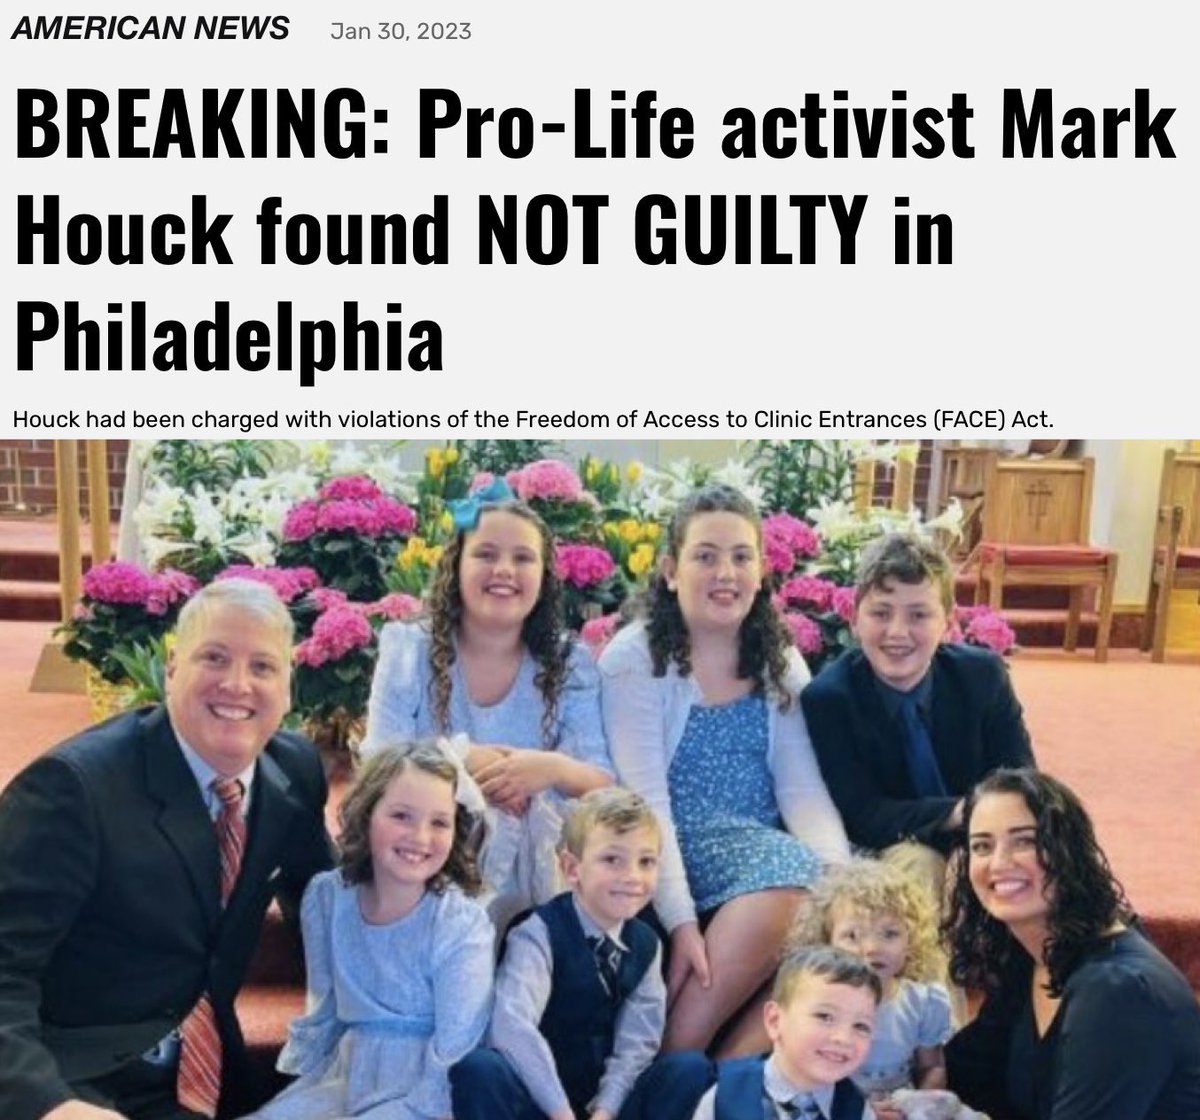 The Catholic father of seven Mark Houck who had his home raided by 30 FBI agents & was facing 11 years in jail for shoving a Planned Parenthood escort who threatened his son was found NOT guilty. #GodIsGood🙏🏼✝️